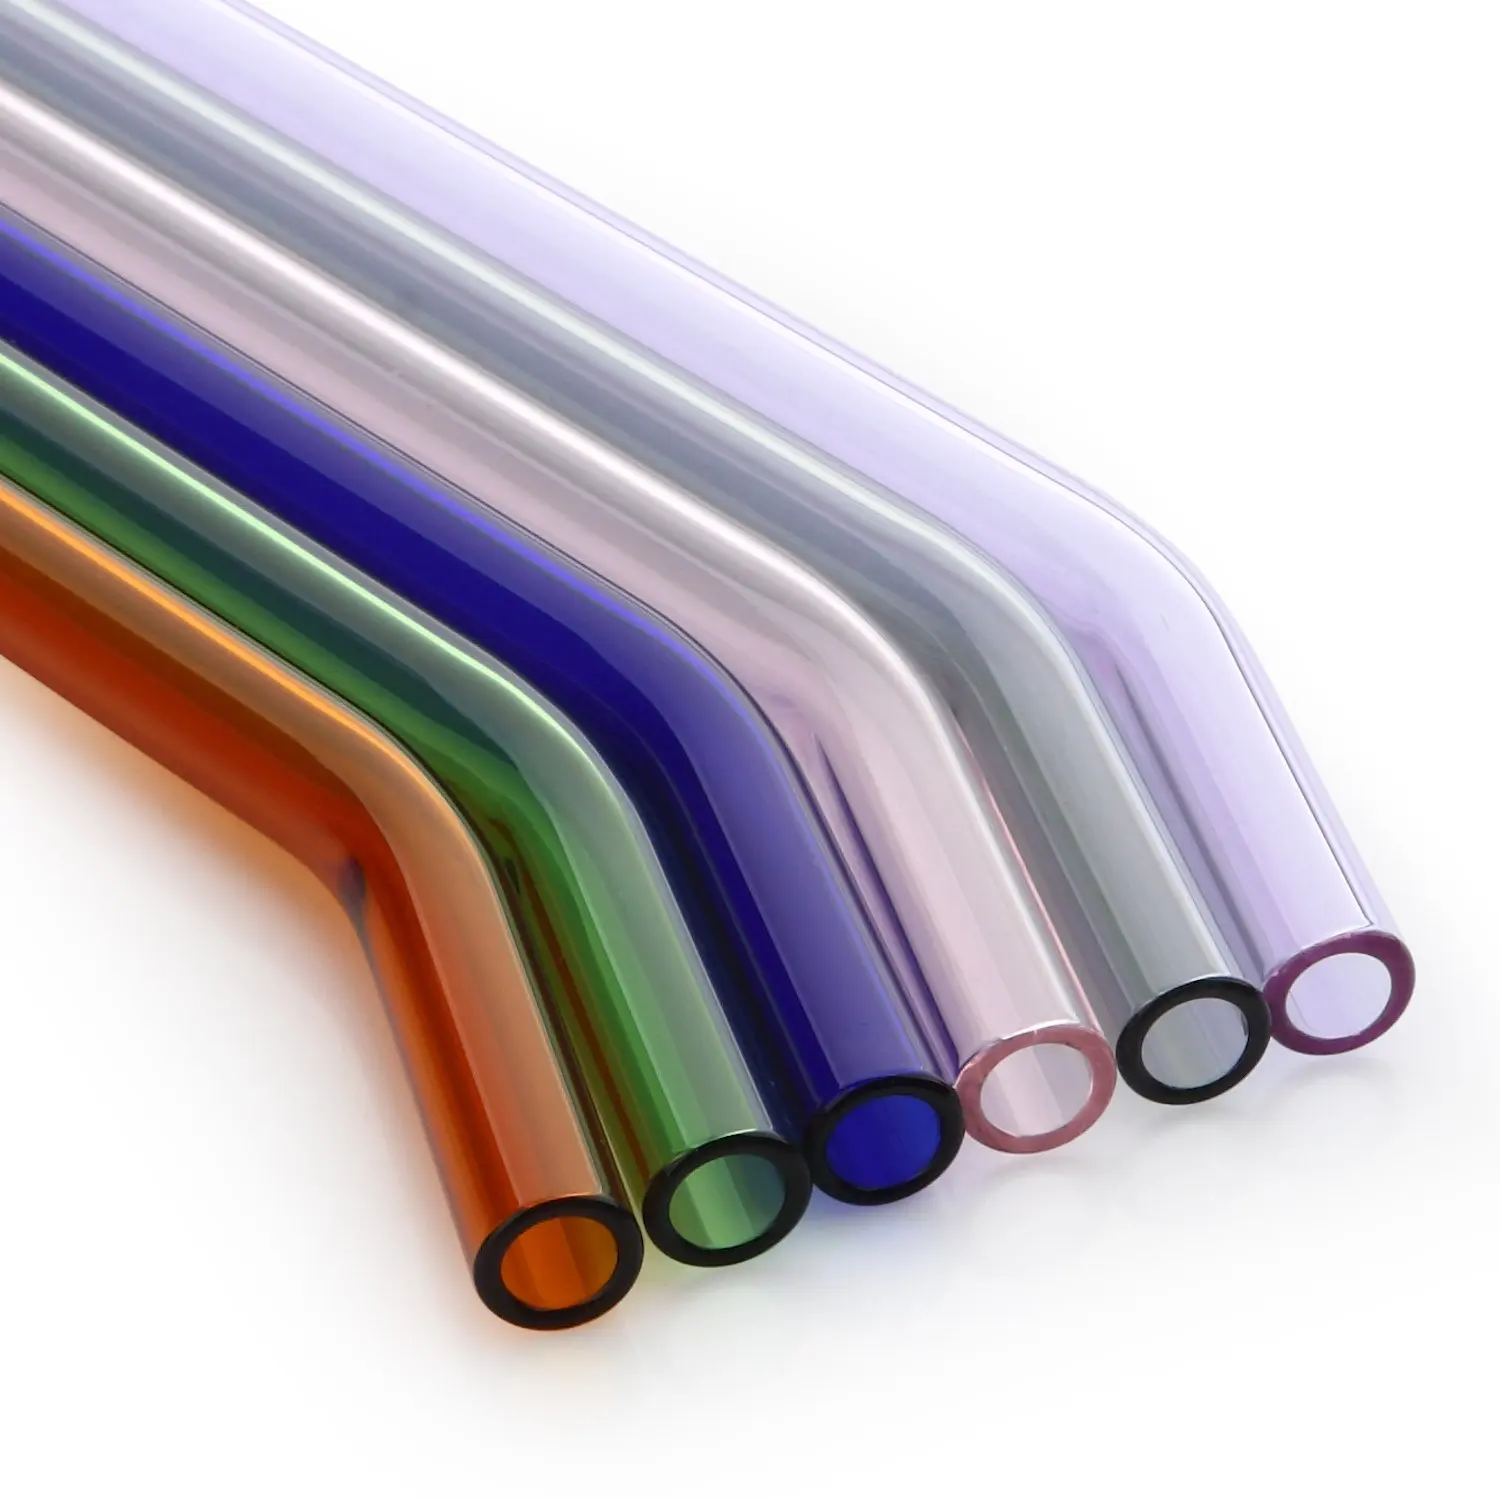 

recyclable reusable borosilicate glass Baboo angled 30cm long drinking straws, Transparent,blue,pink,black,white,purple or customized